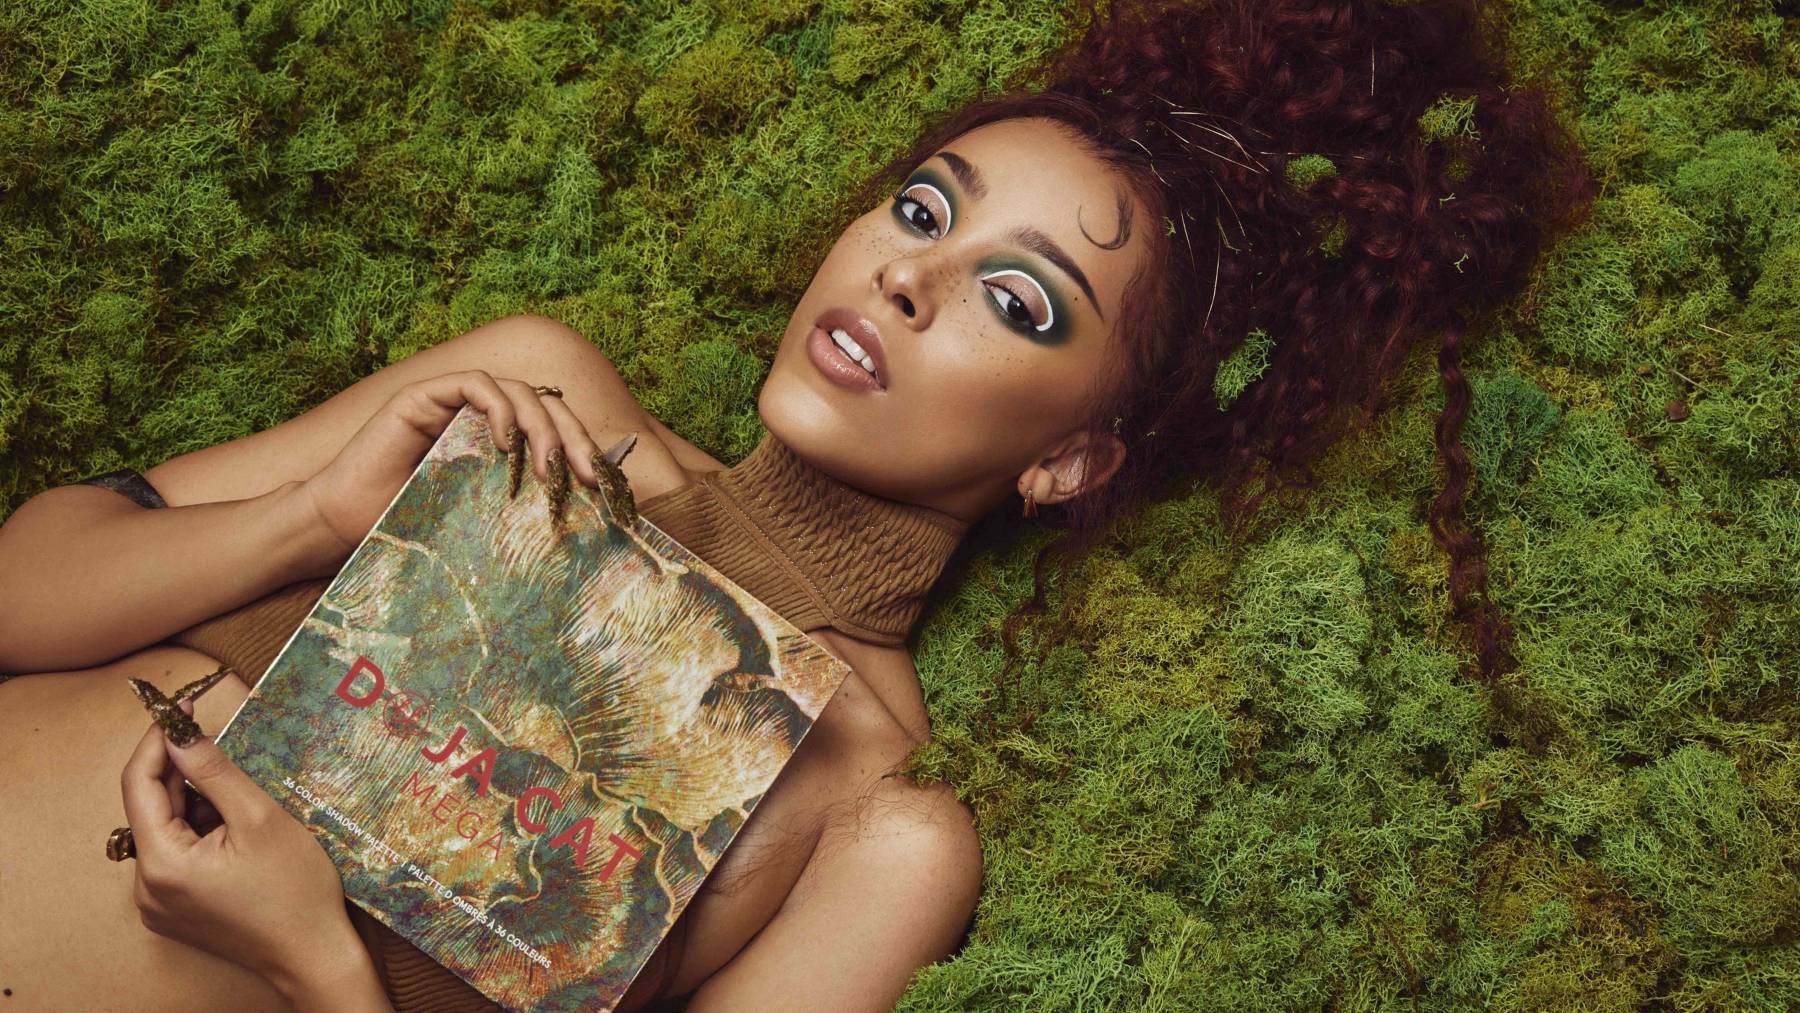 Doja Cat launched her makeup label with BH Cosmetics in September 2021.